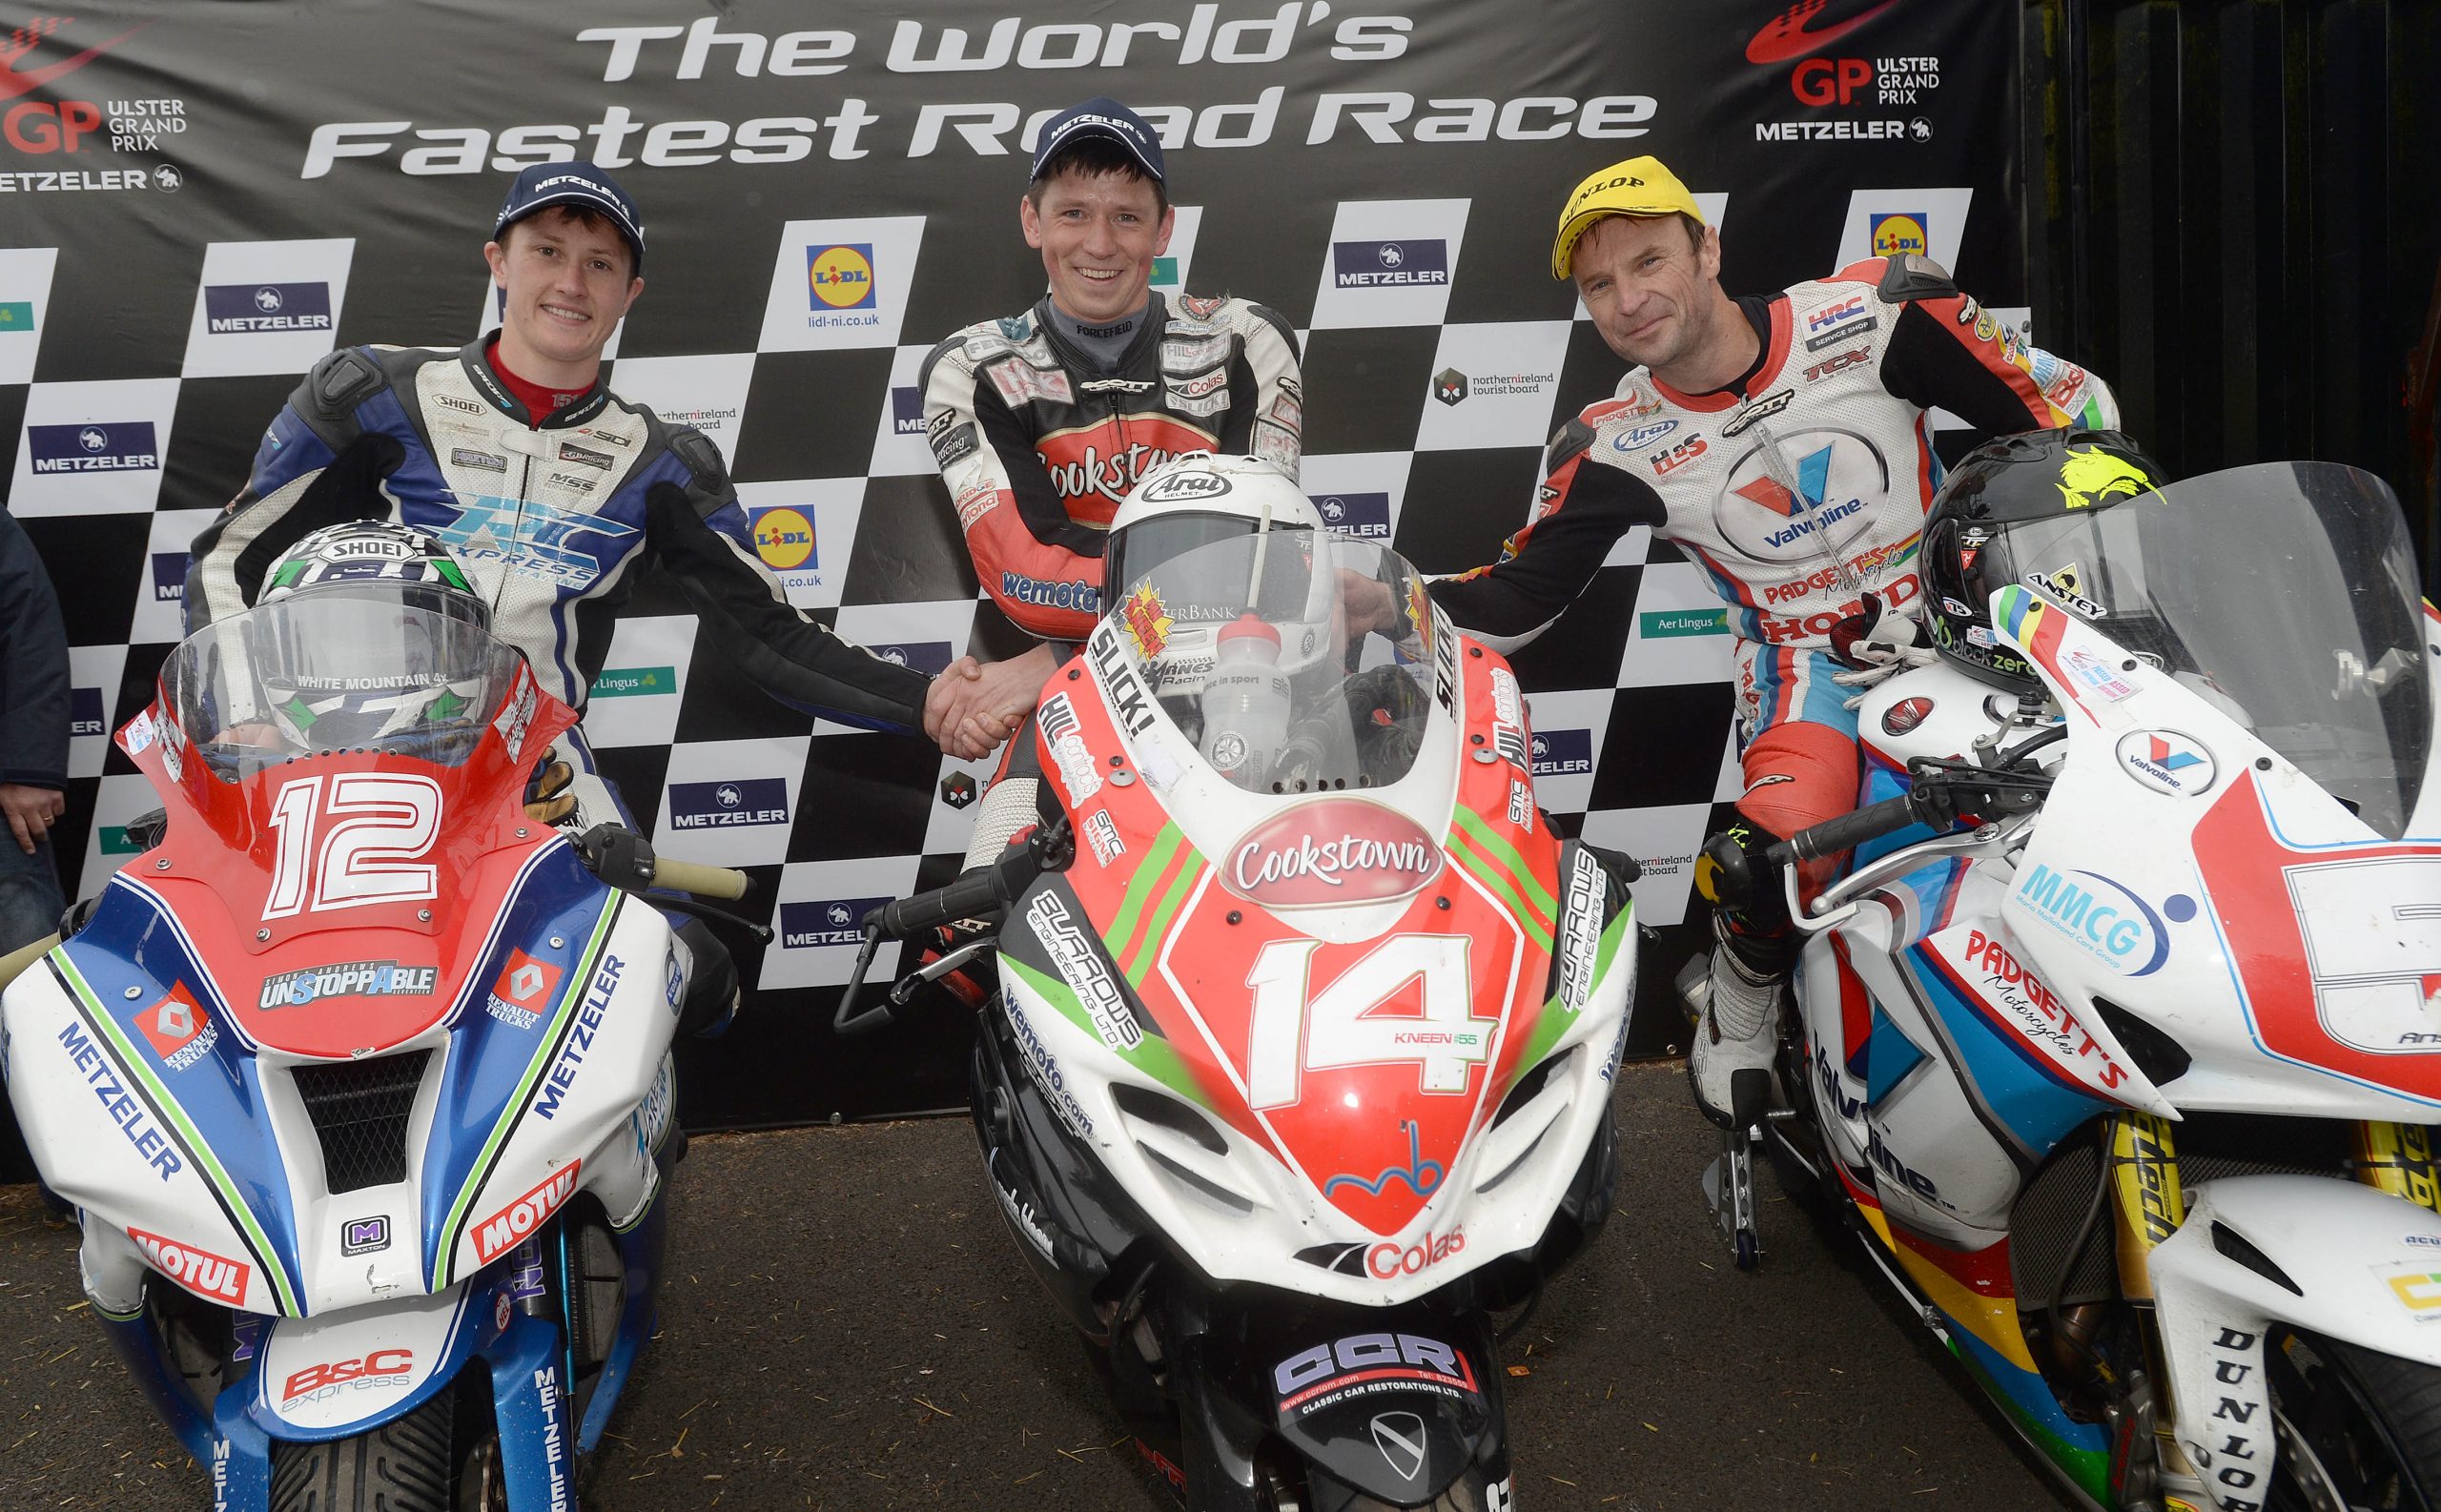 Last year's Superstock podium - Dean Harrison, Dan Kneen and Bruce Anstey - image by Pacemaker Press International